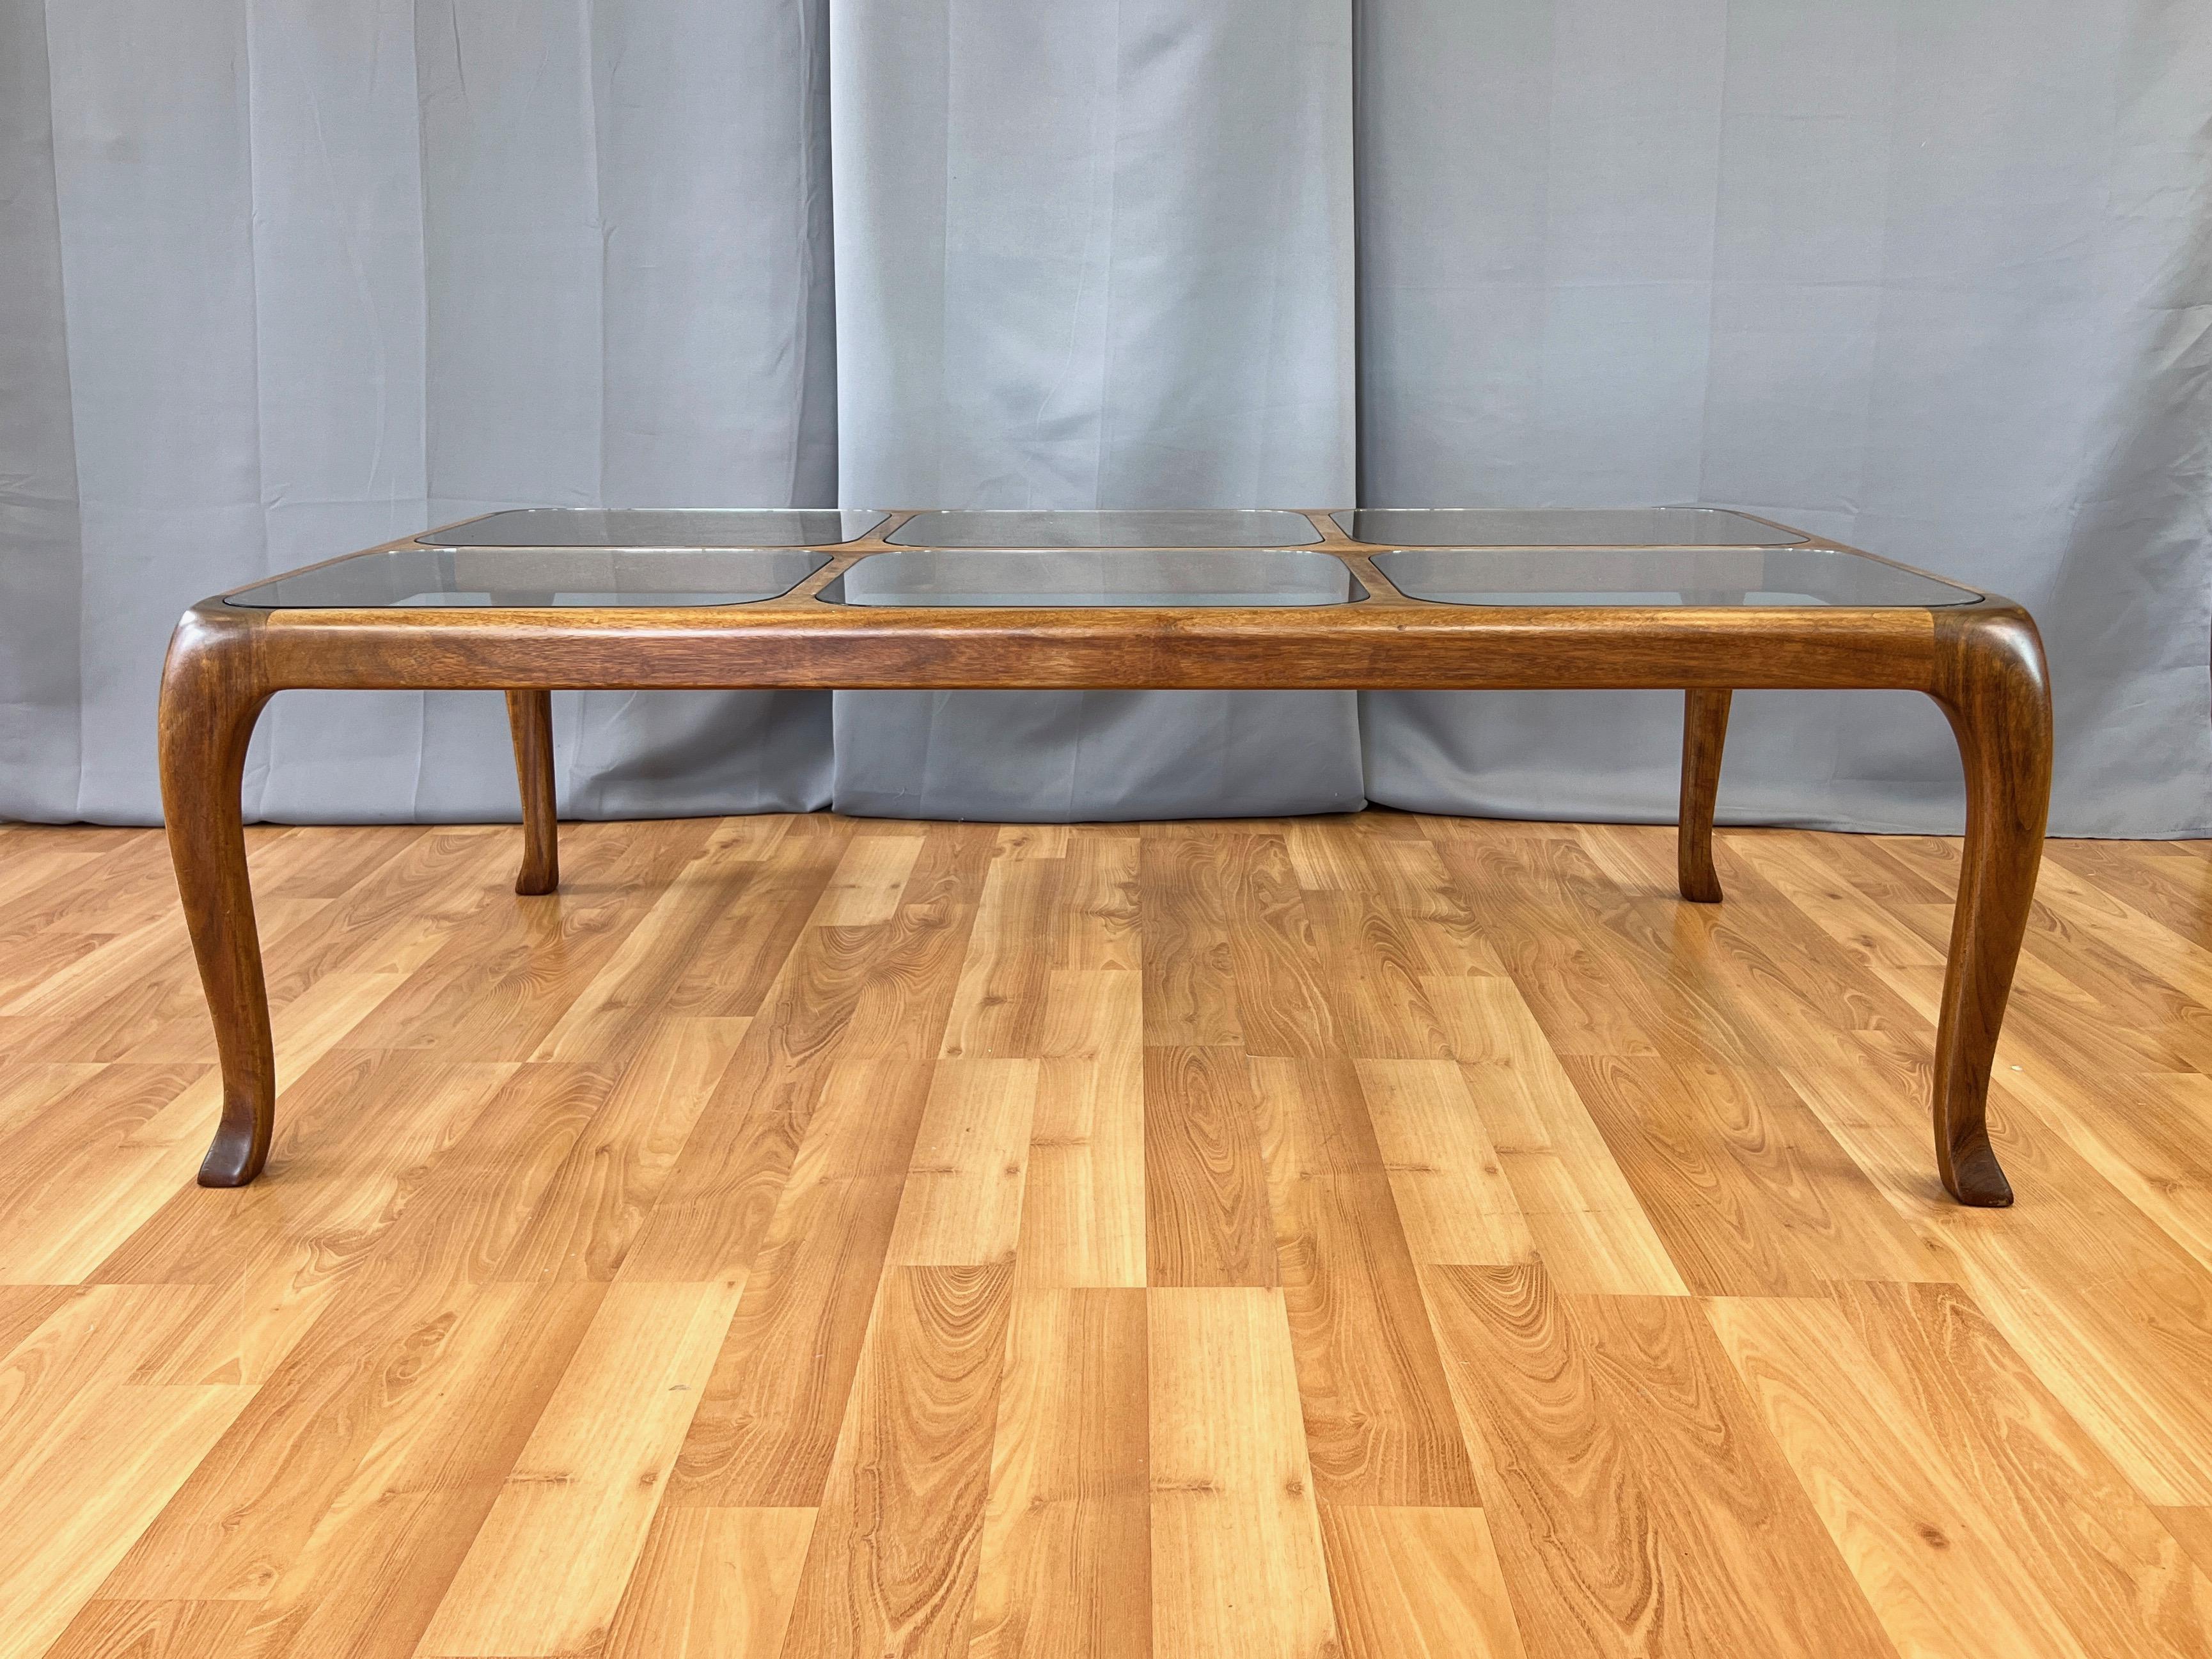 Thomas Saydah Large Walnut and Glass Coffee Table, Signed and Dated, 1982 For Sale 6